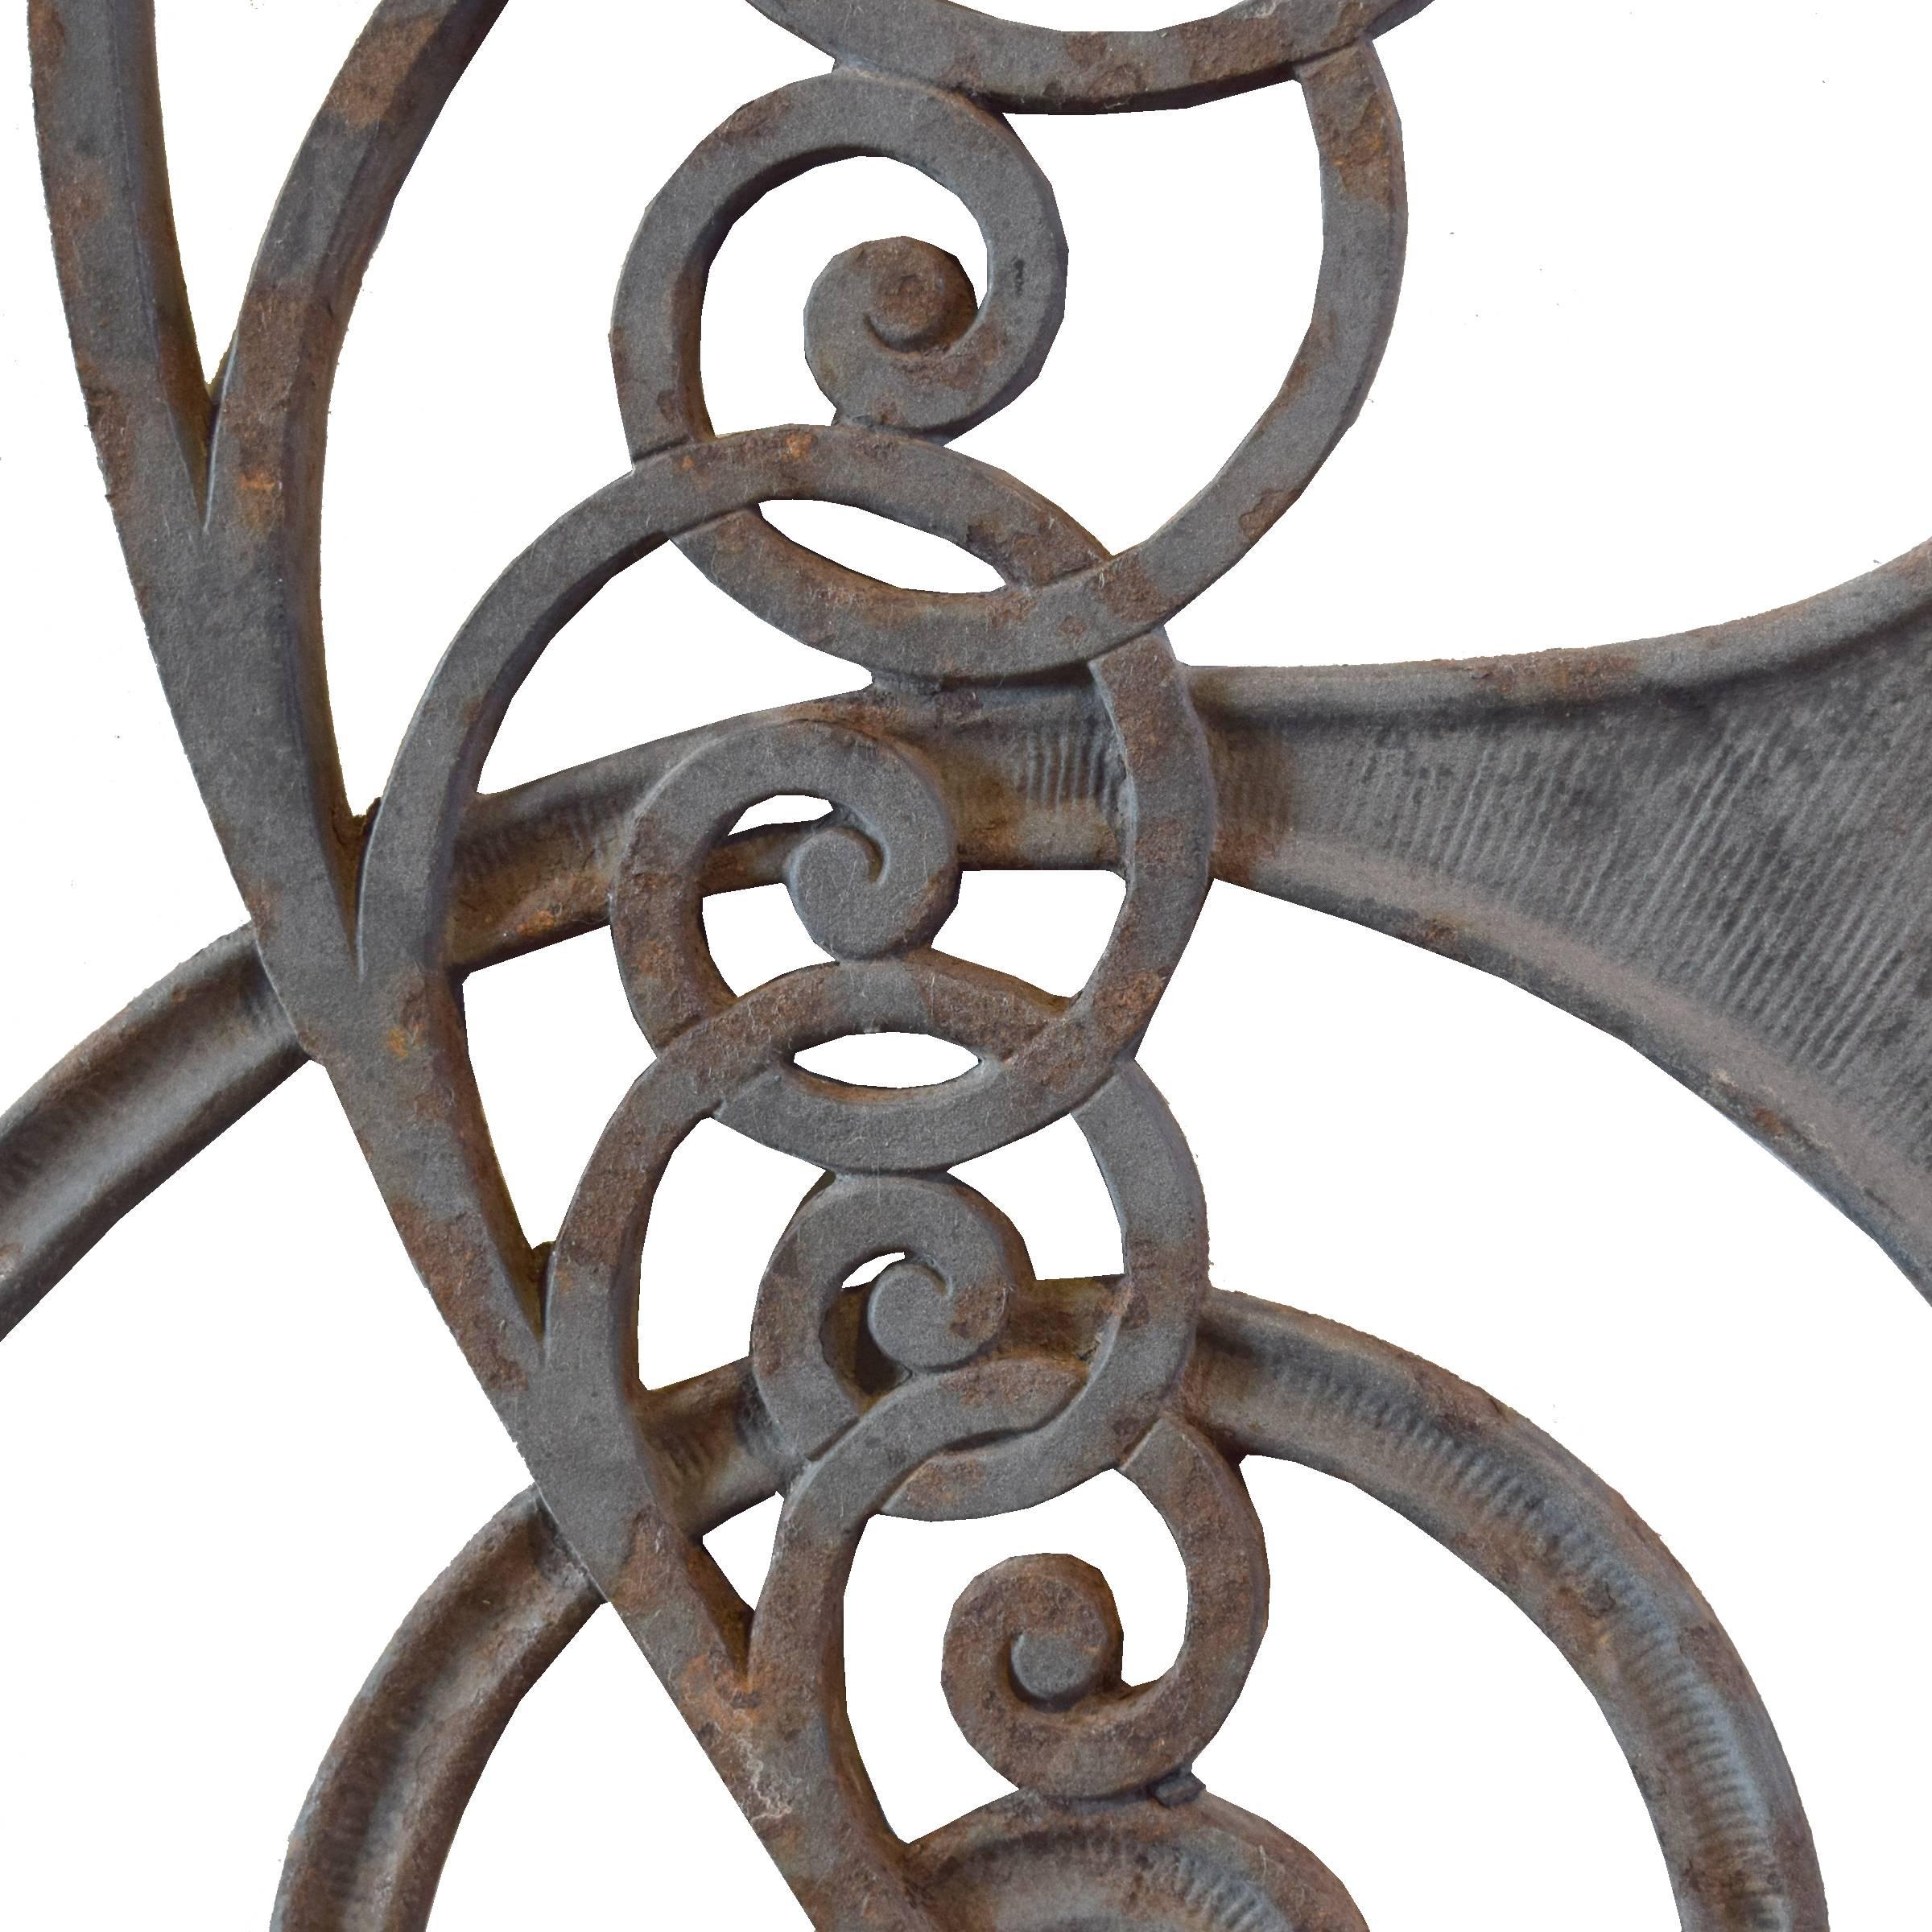 American Cast Iron Stair Balustrade from the Kansas City Board of Trade